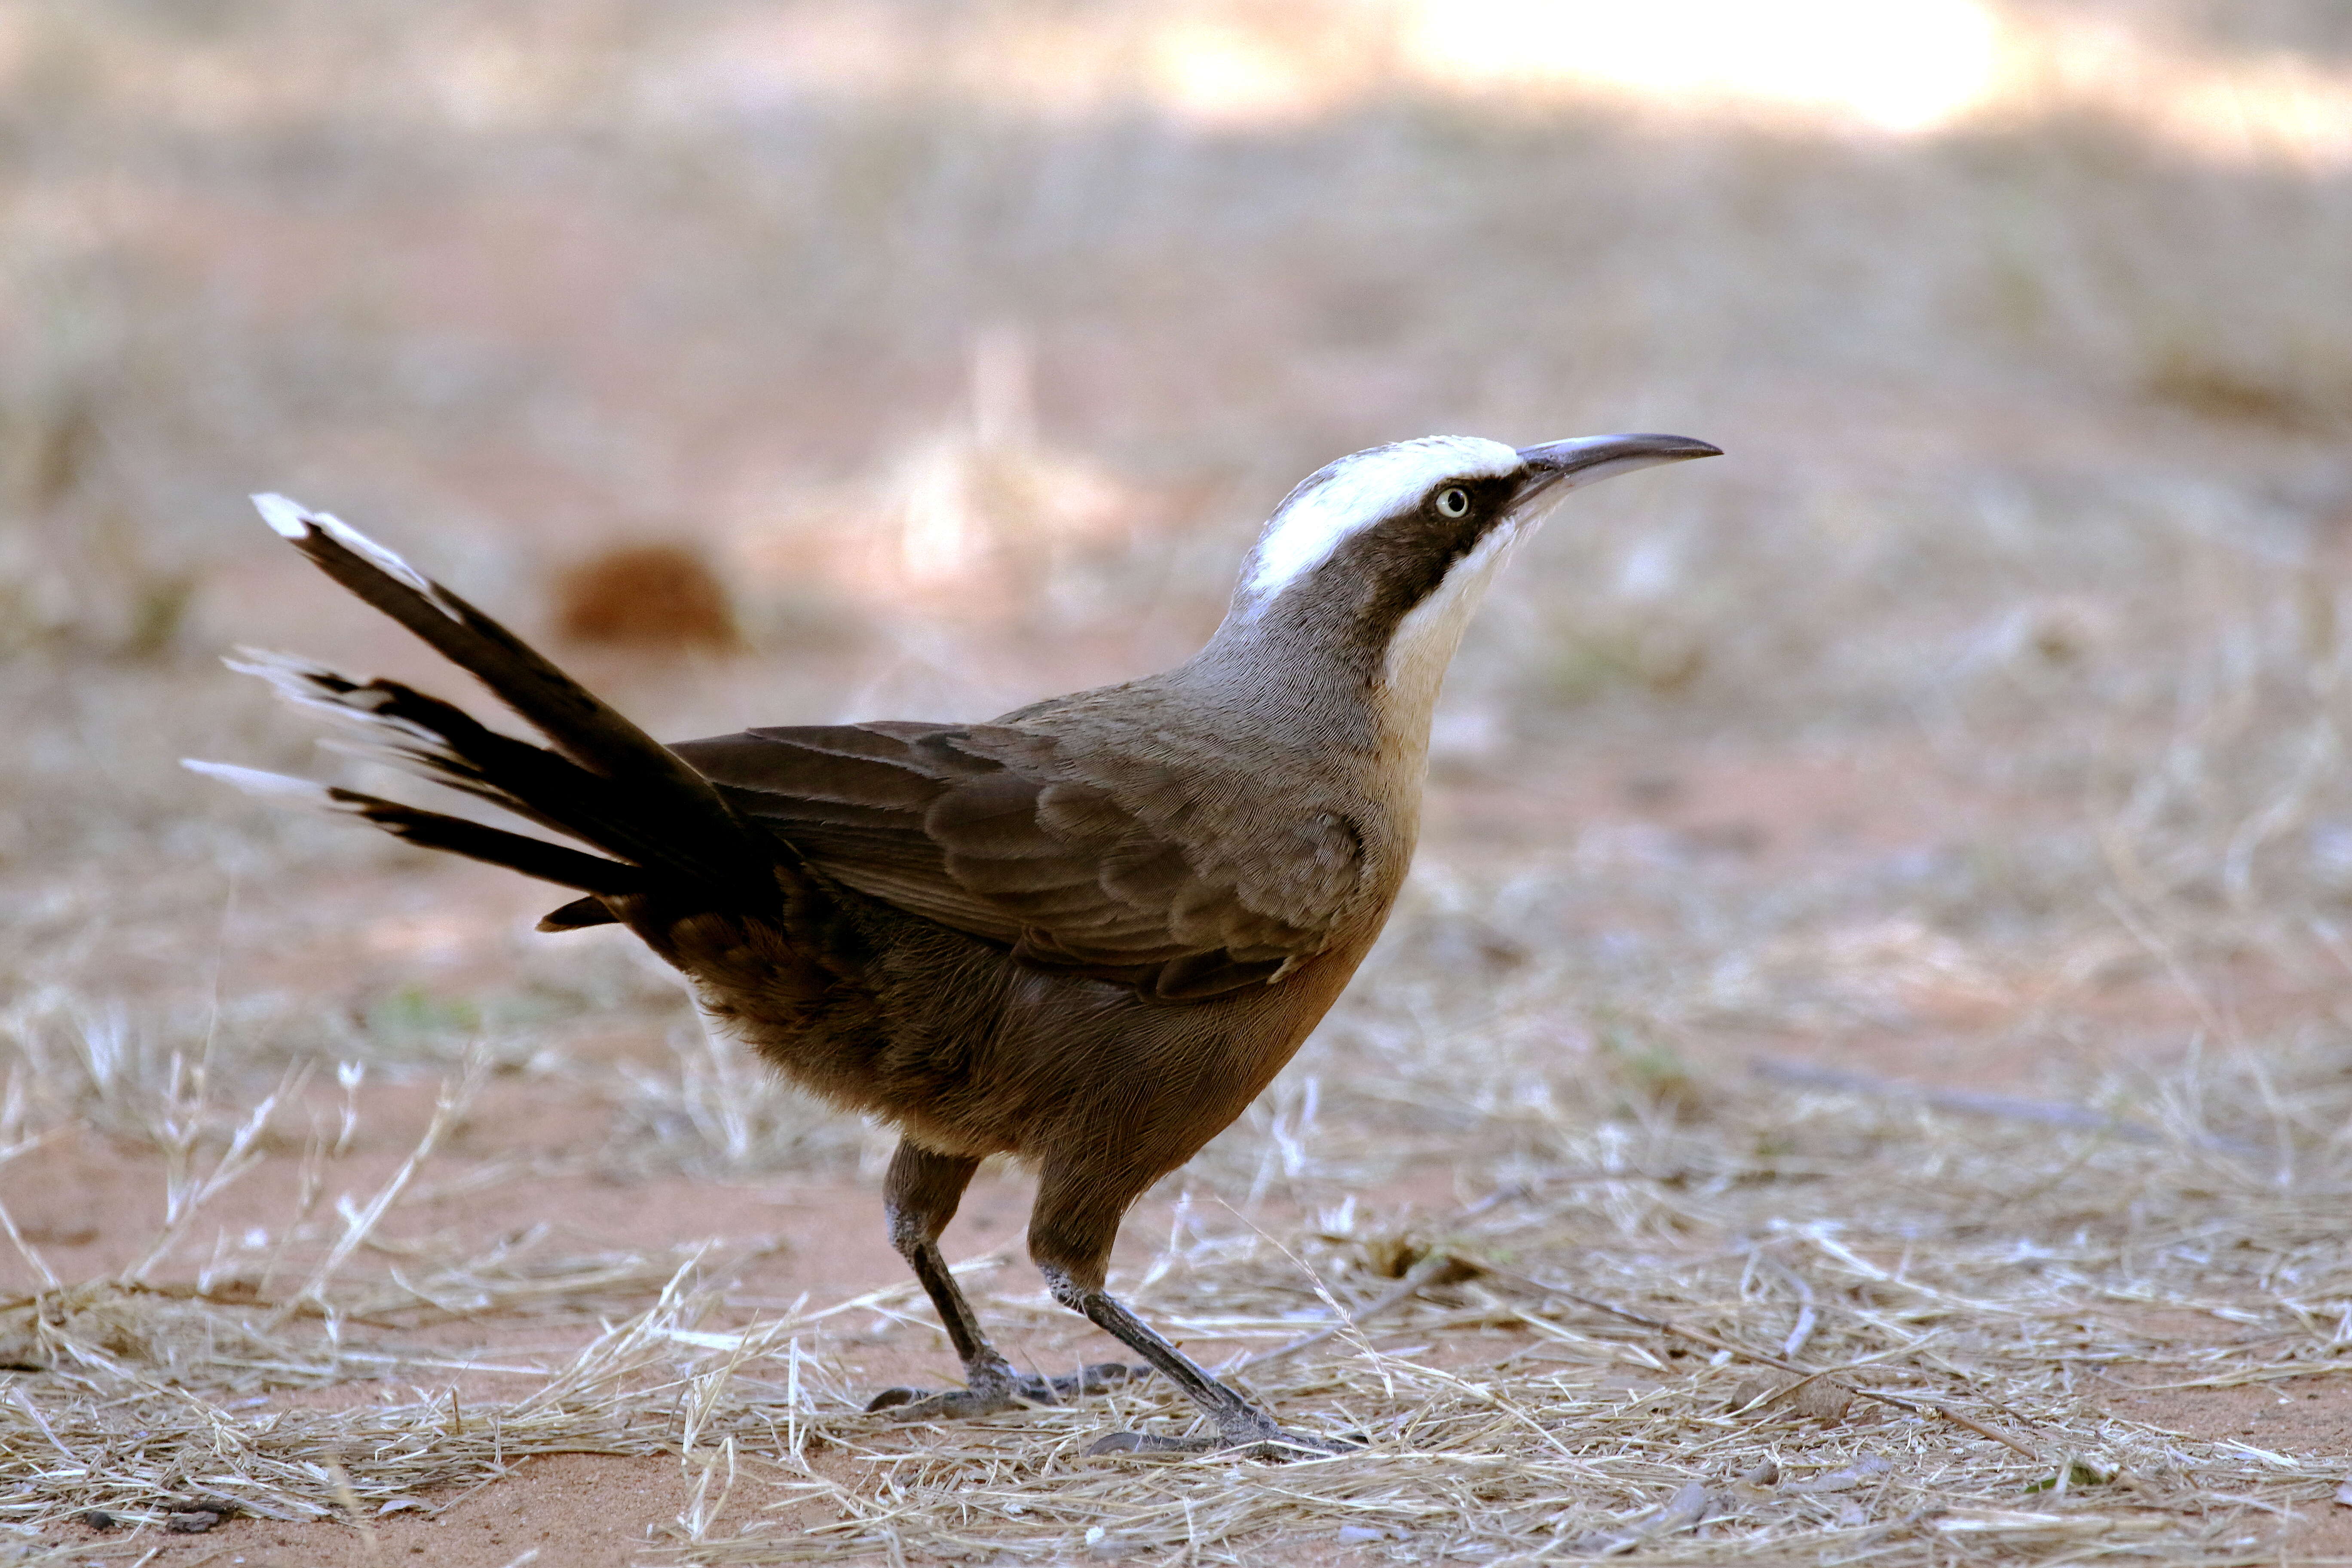 Image of Australo-Papuan babblers